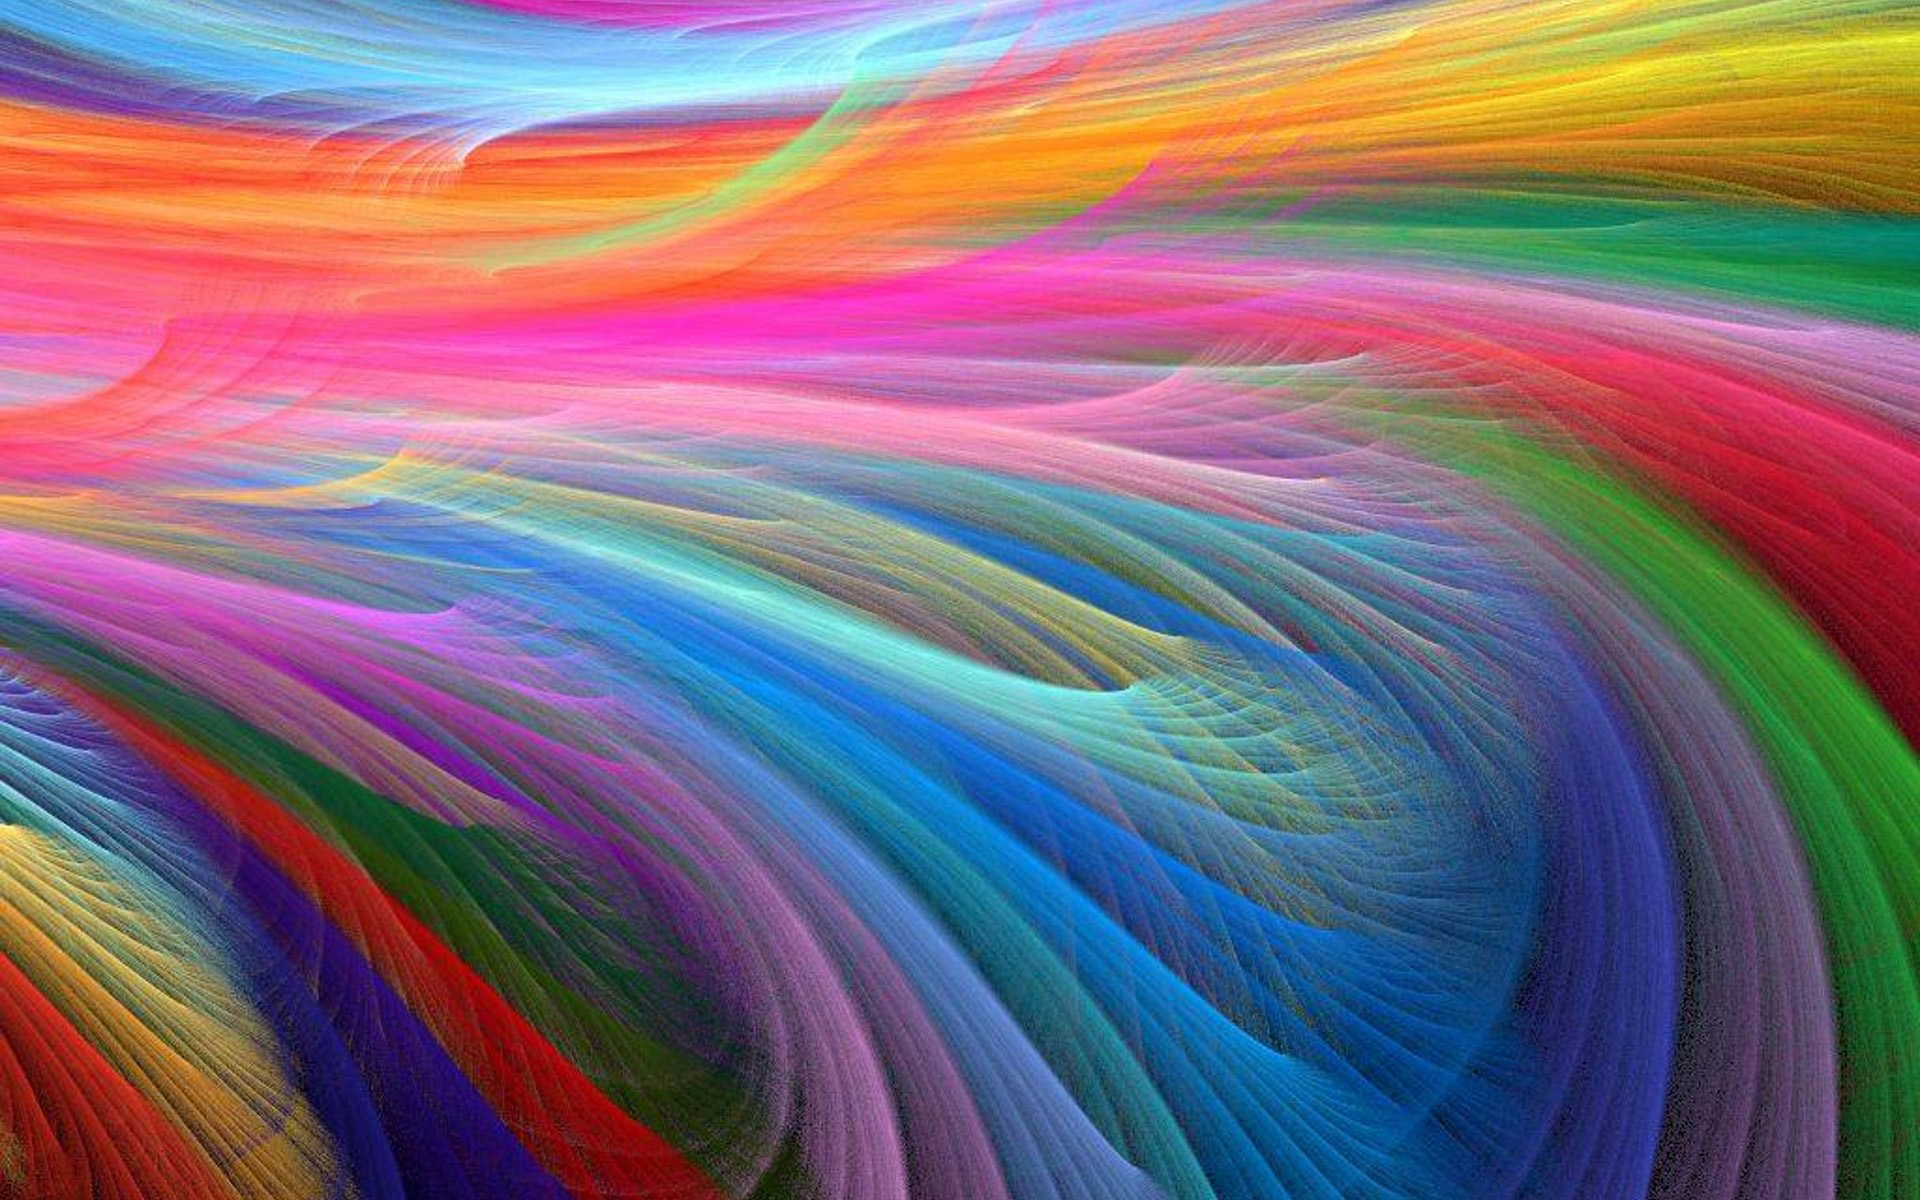 Colorful backgrounds images - danasrhp.top